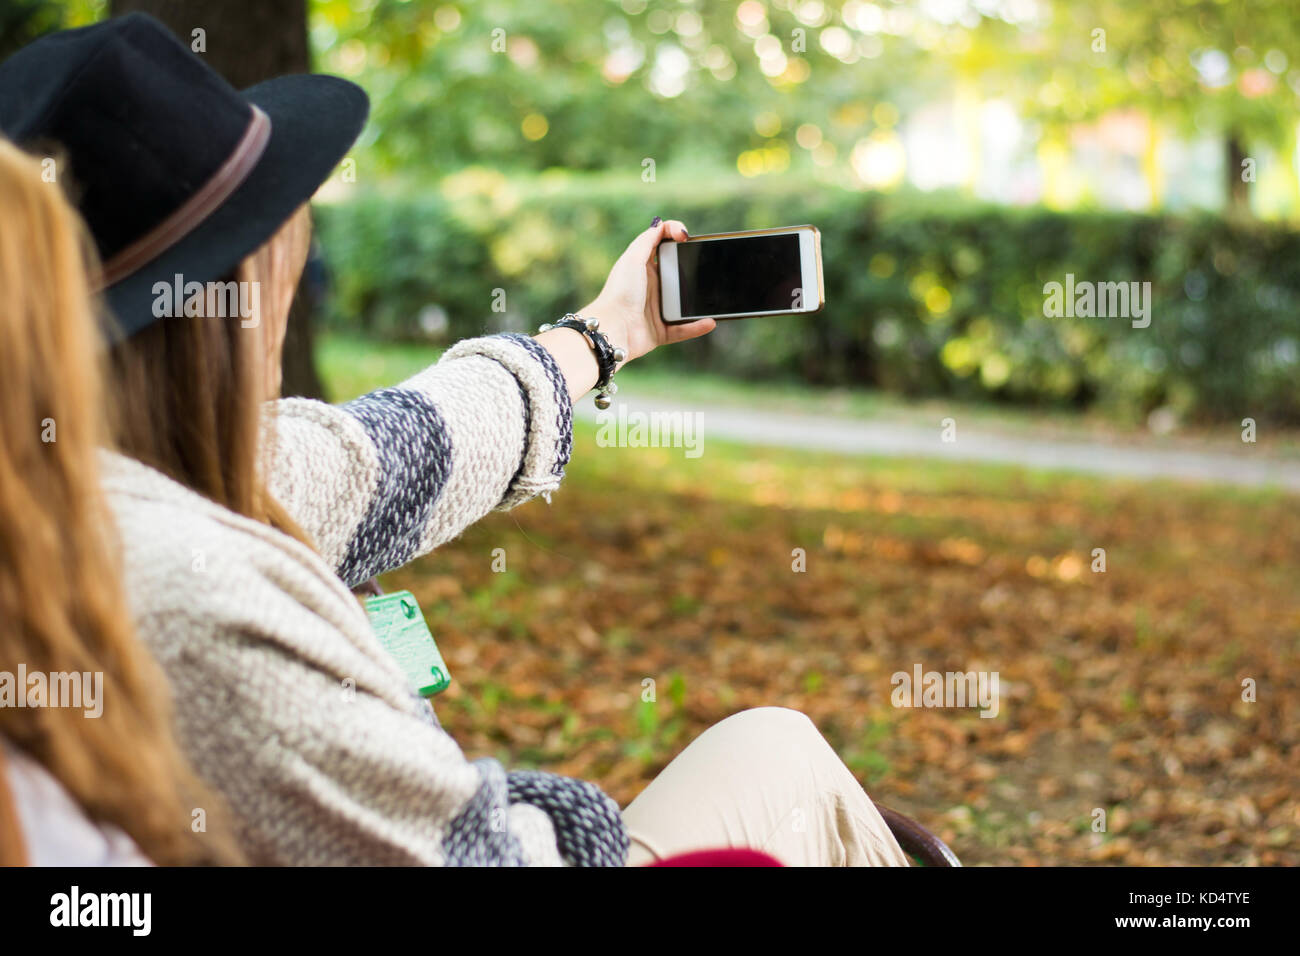 Two girlfriends taking selfie in the park Stock Photo